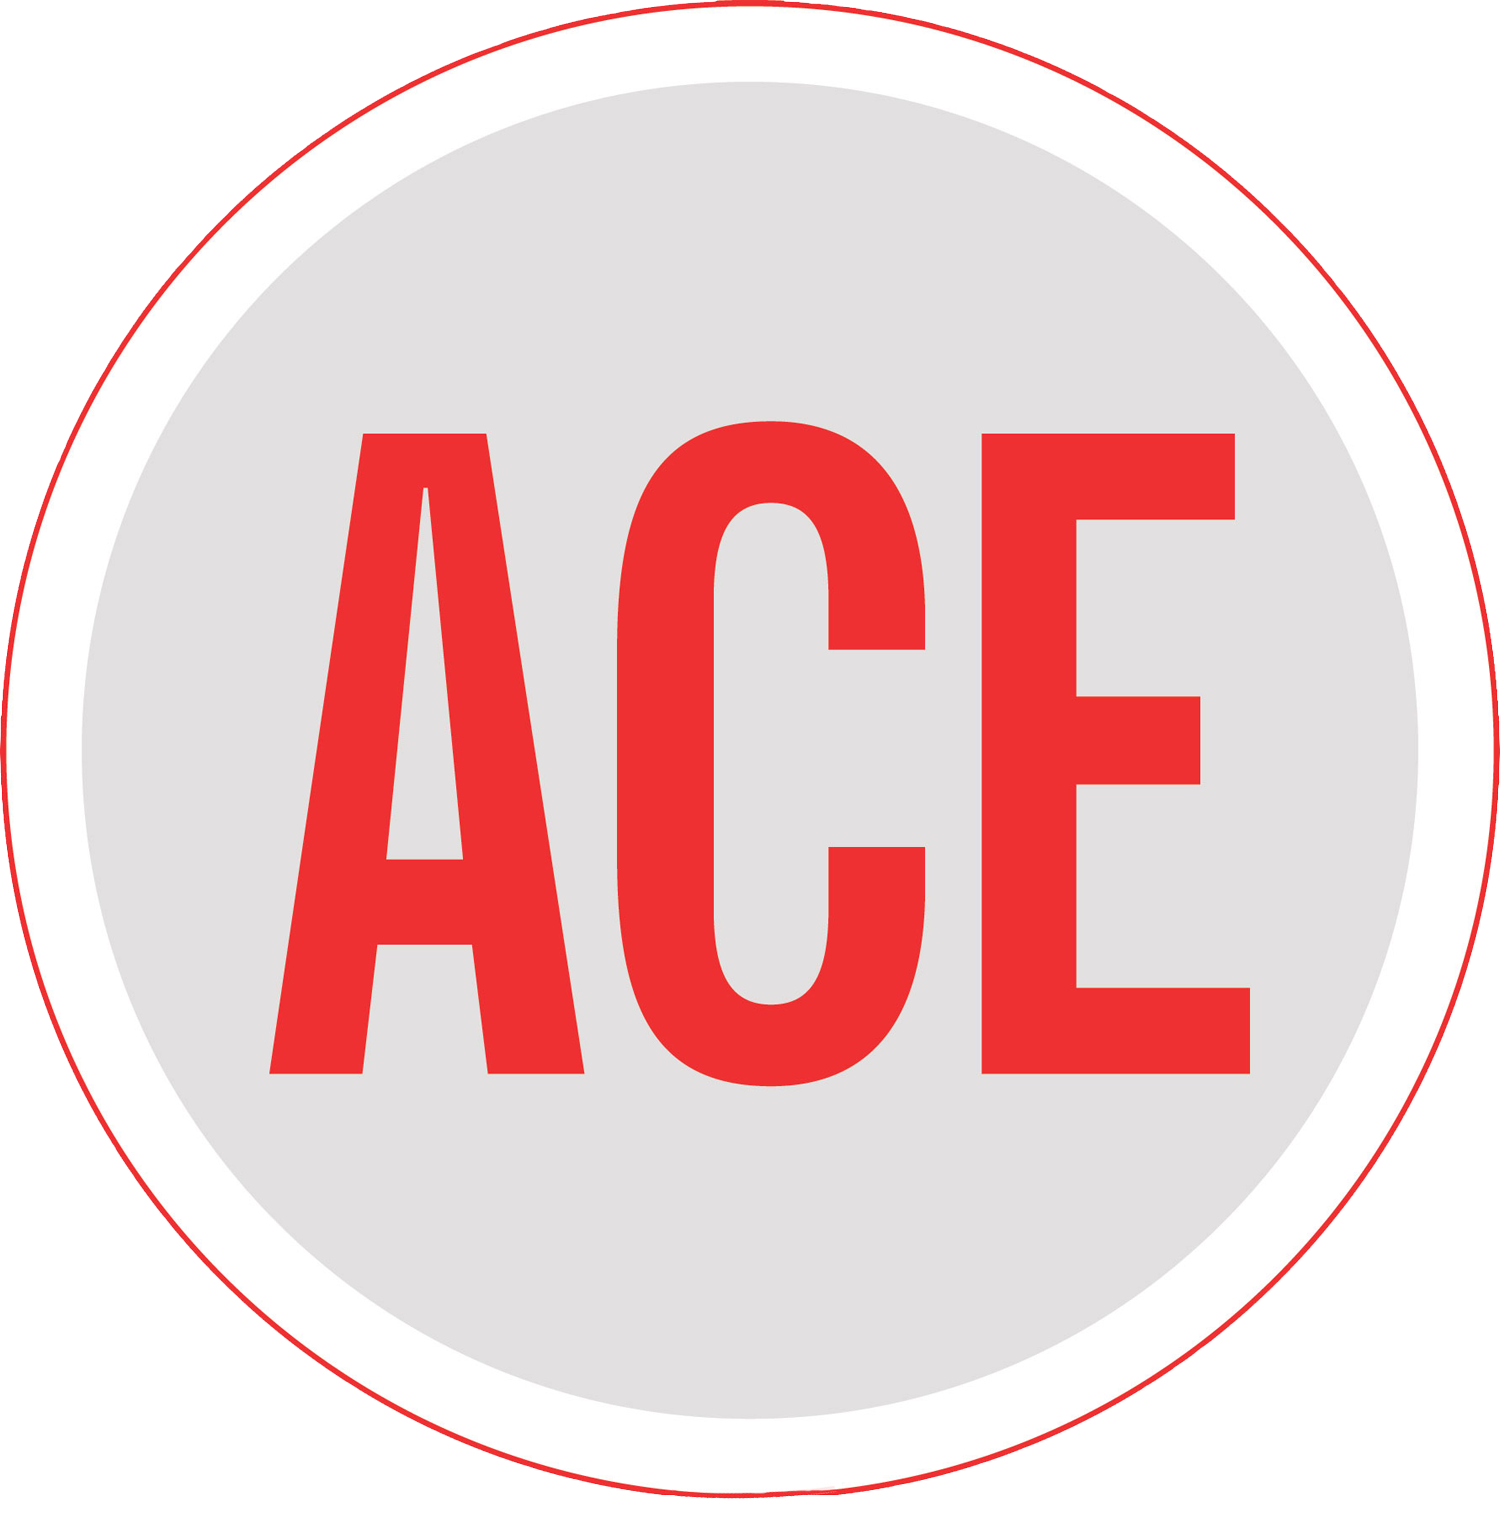 ACE Programs for the Homeless - Empowering Those in Need